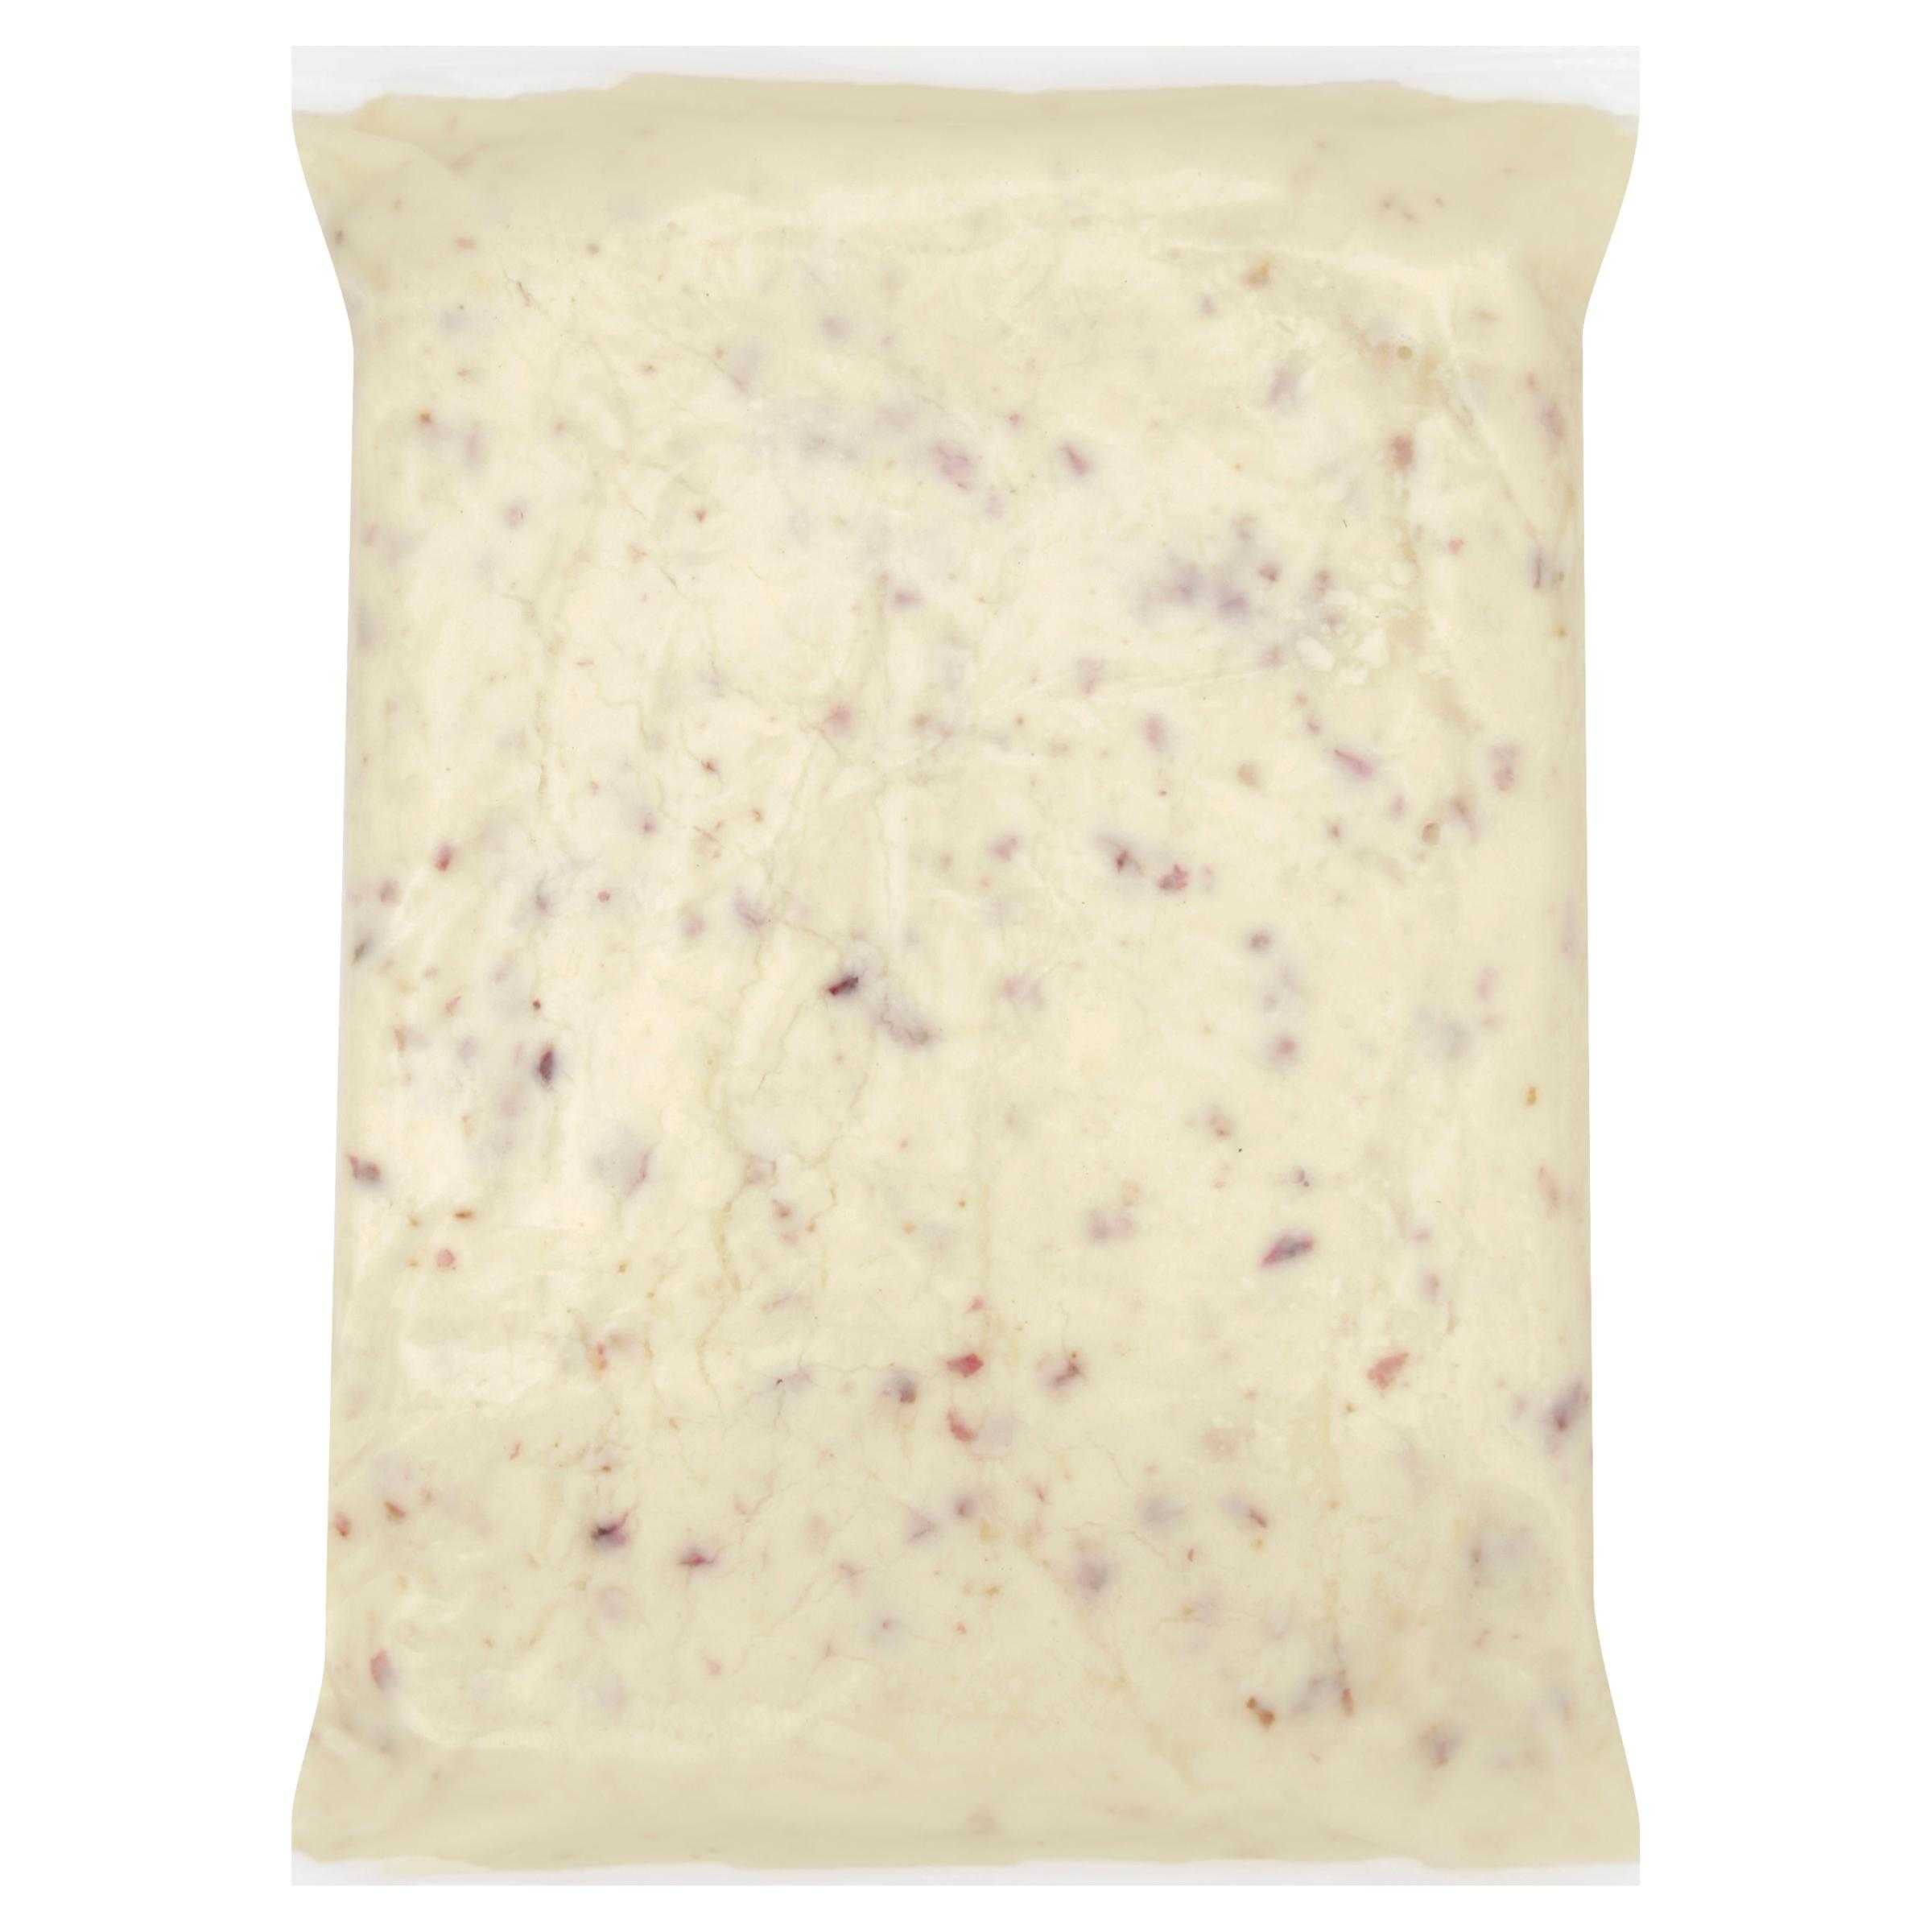 Simply Potatoes® Refrigerated Red Skin Mashed Potatoes made with skin-on Red potatoes, 4/6 Lb Bags